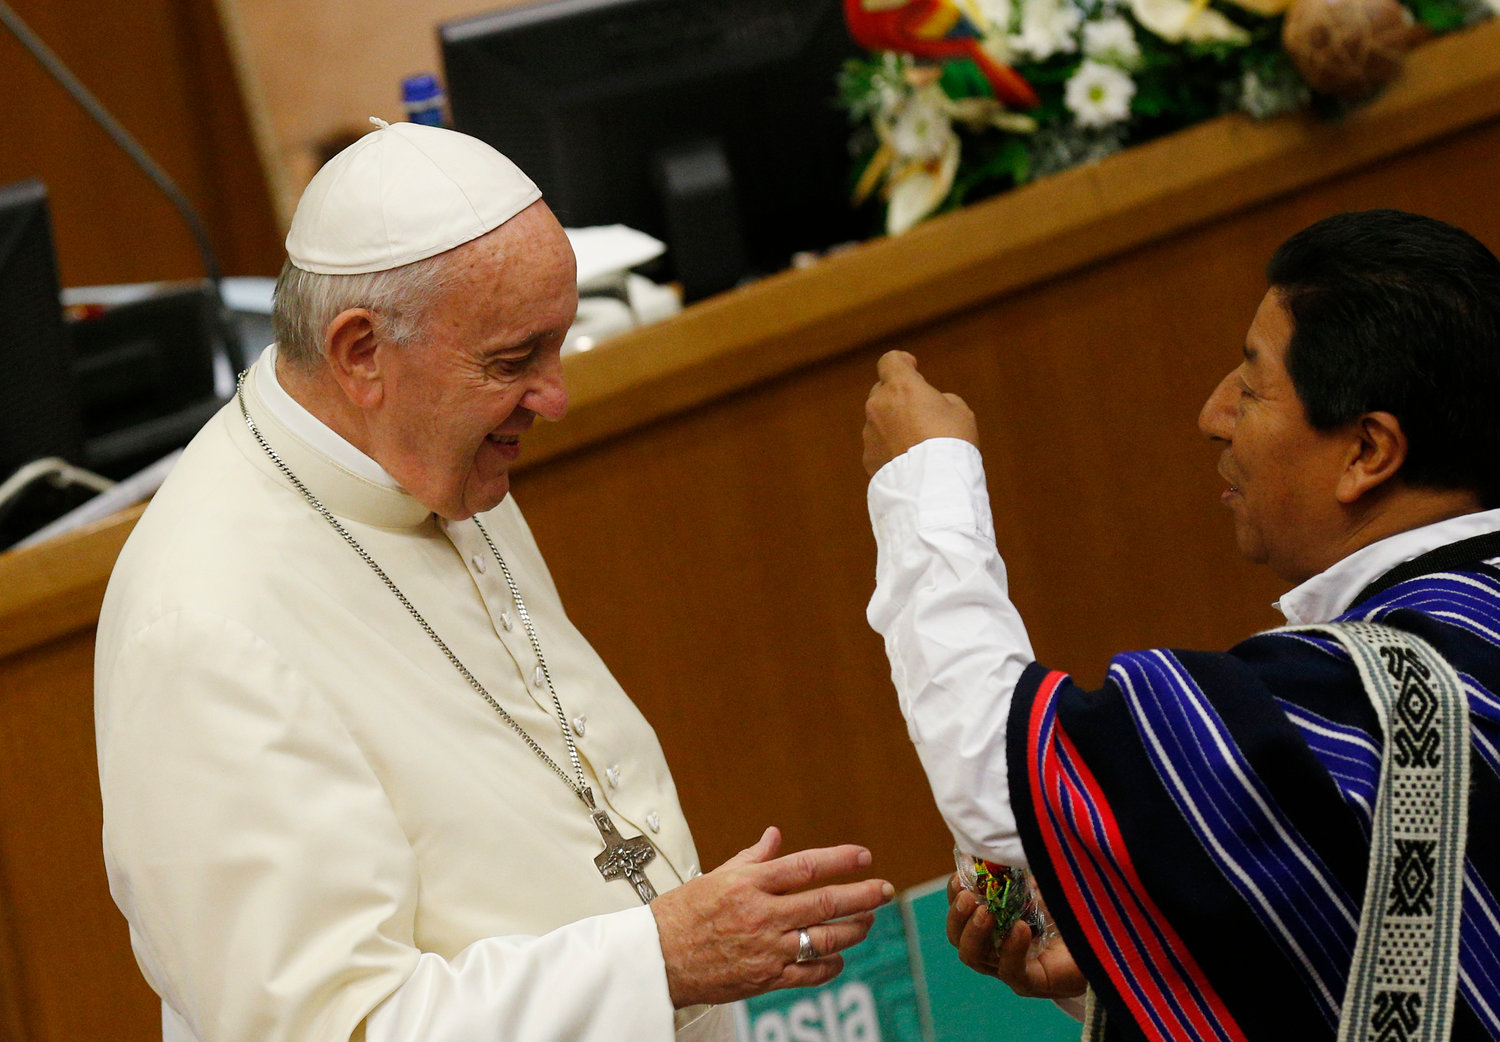 An unidentified man presents a neckerchief to Pope Francis at the start of a session of the Synod of Bishops for the Amazon at the Vatican Oct. 15, 2019.